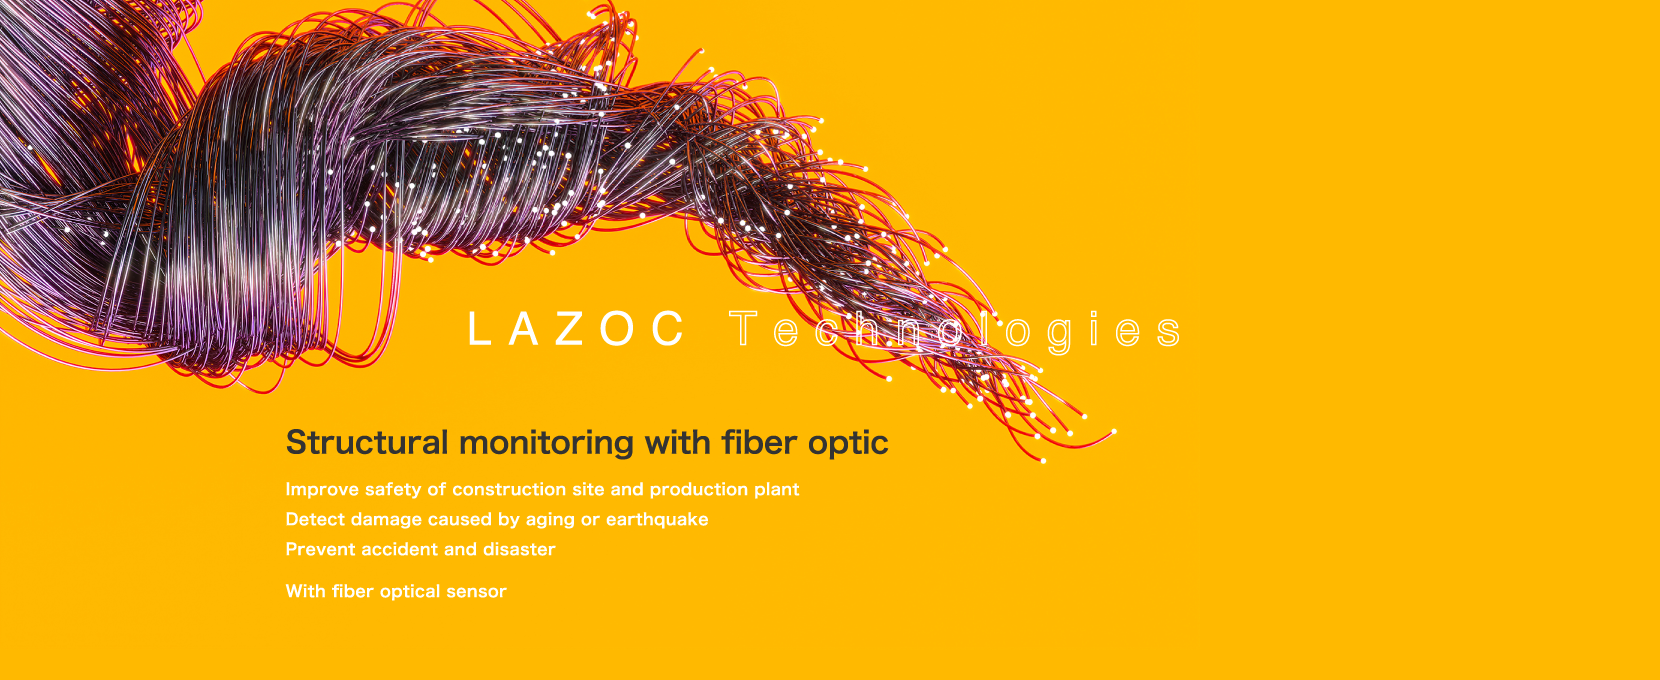 Structural monitoring with fiber optic : Improve safety of construction site and production plant Detect damage caused by aging or earthquake Prevent accident and disaster With fiber optical sensor